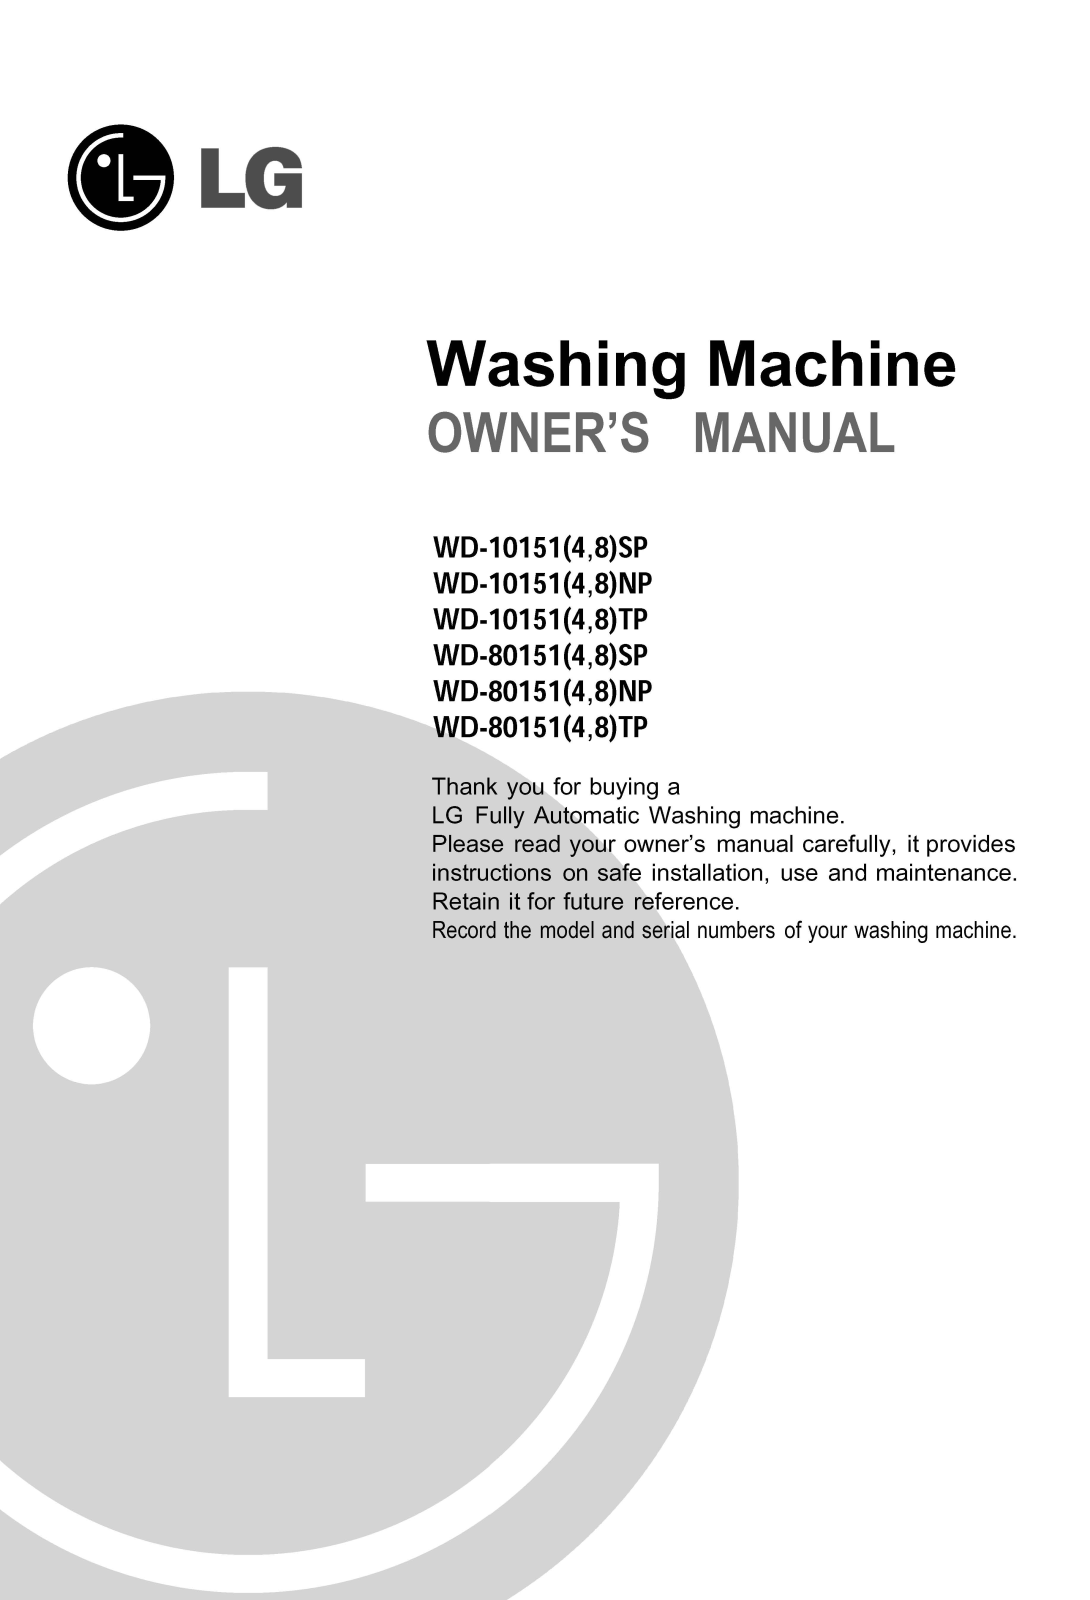 LG WD-10158TP, WD-80158TP Owner’s Manual